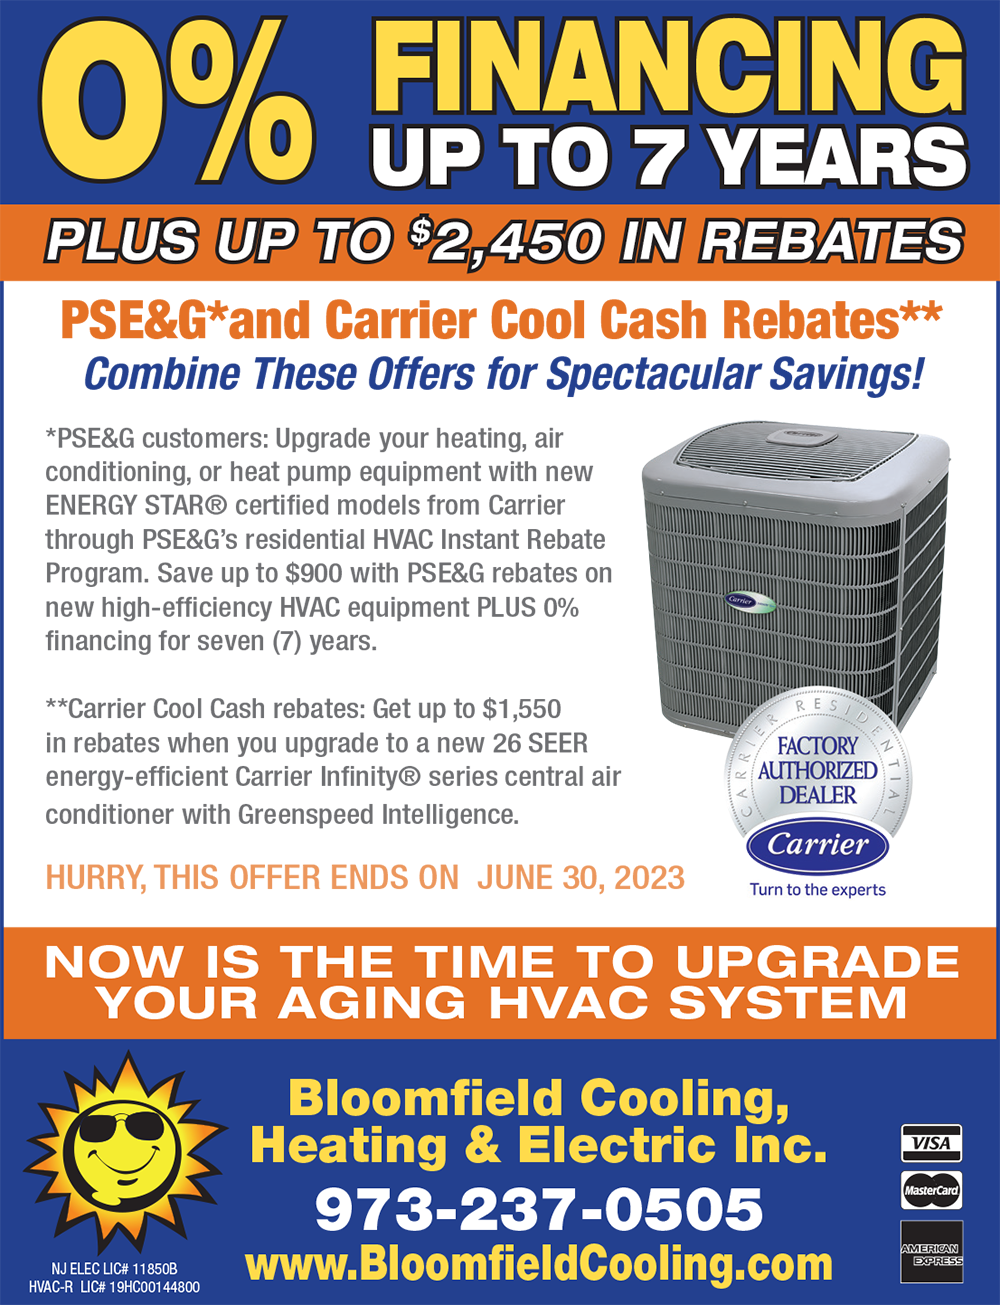 Bloomfield Cooling, Heating & Electric - 0% Financing Up to 7 Years